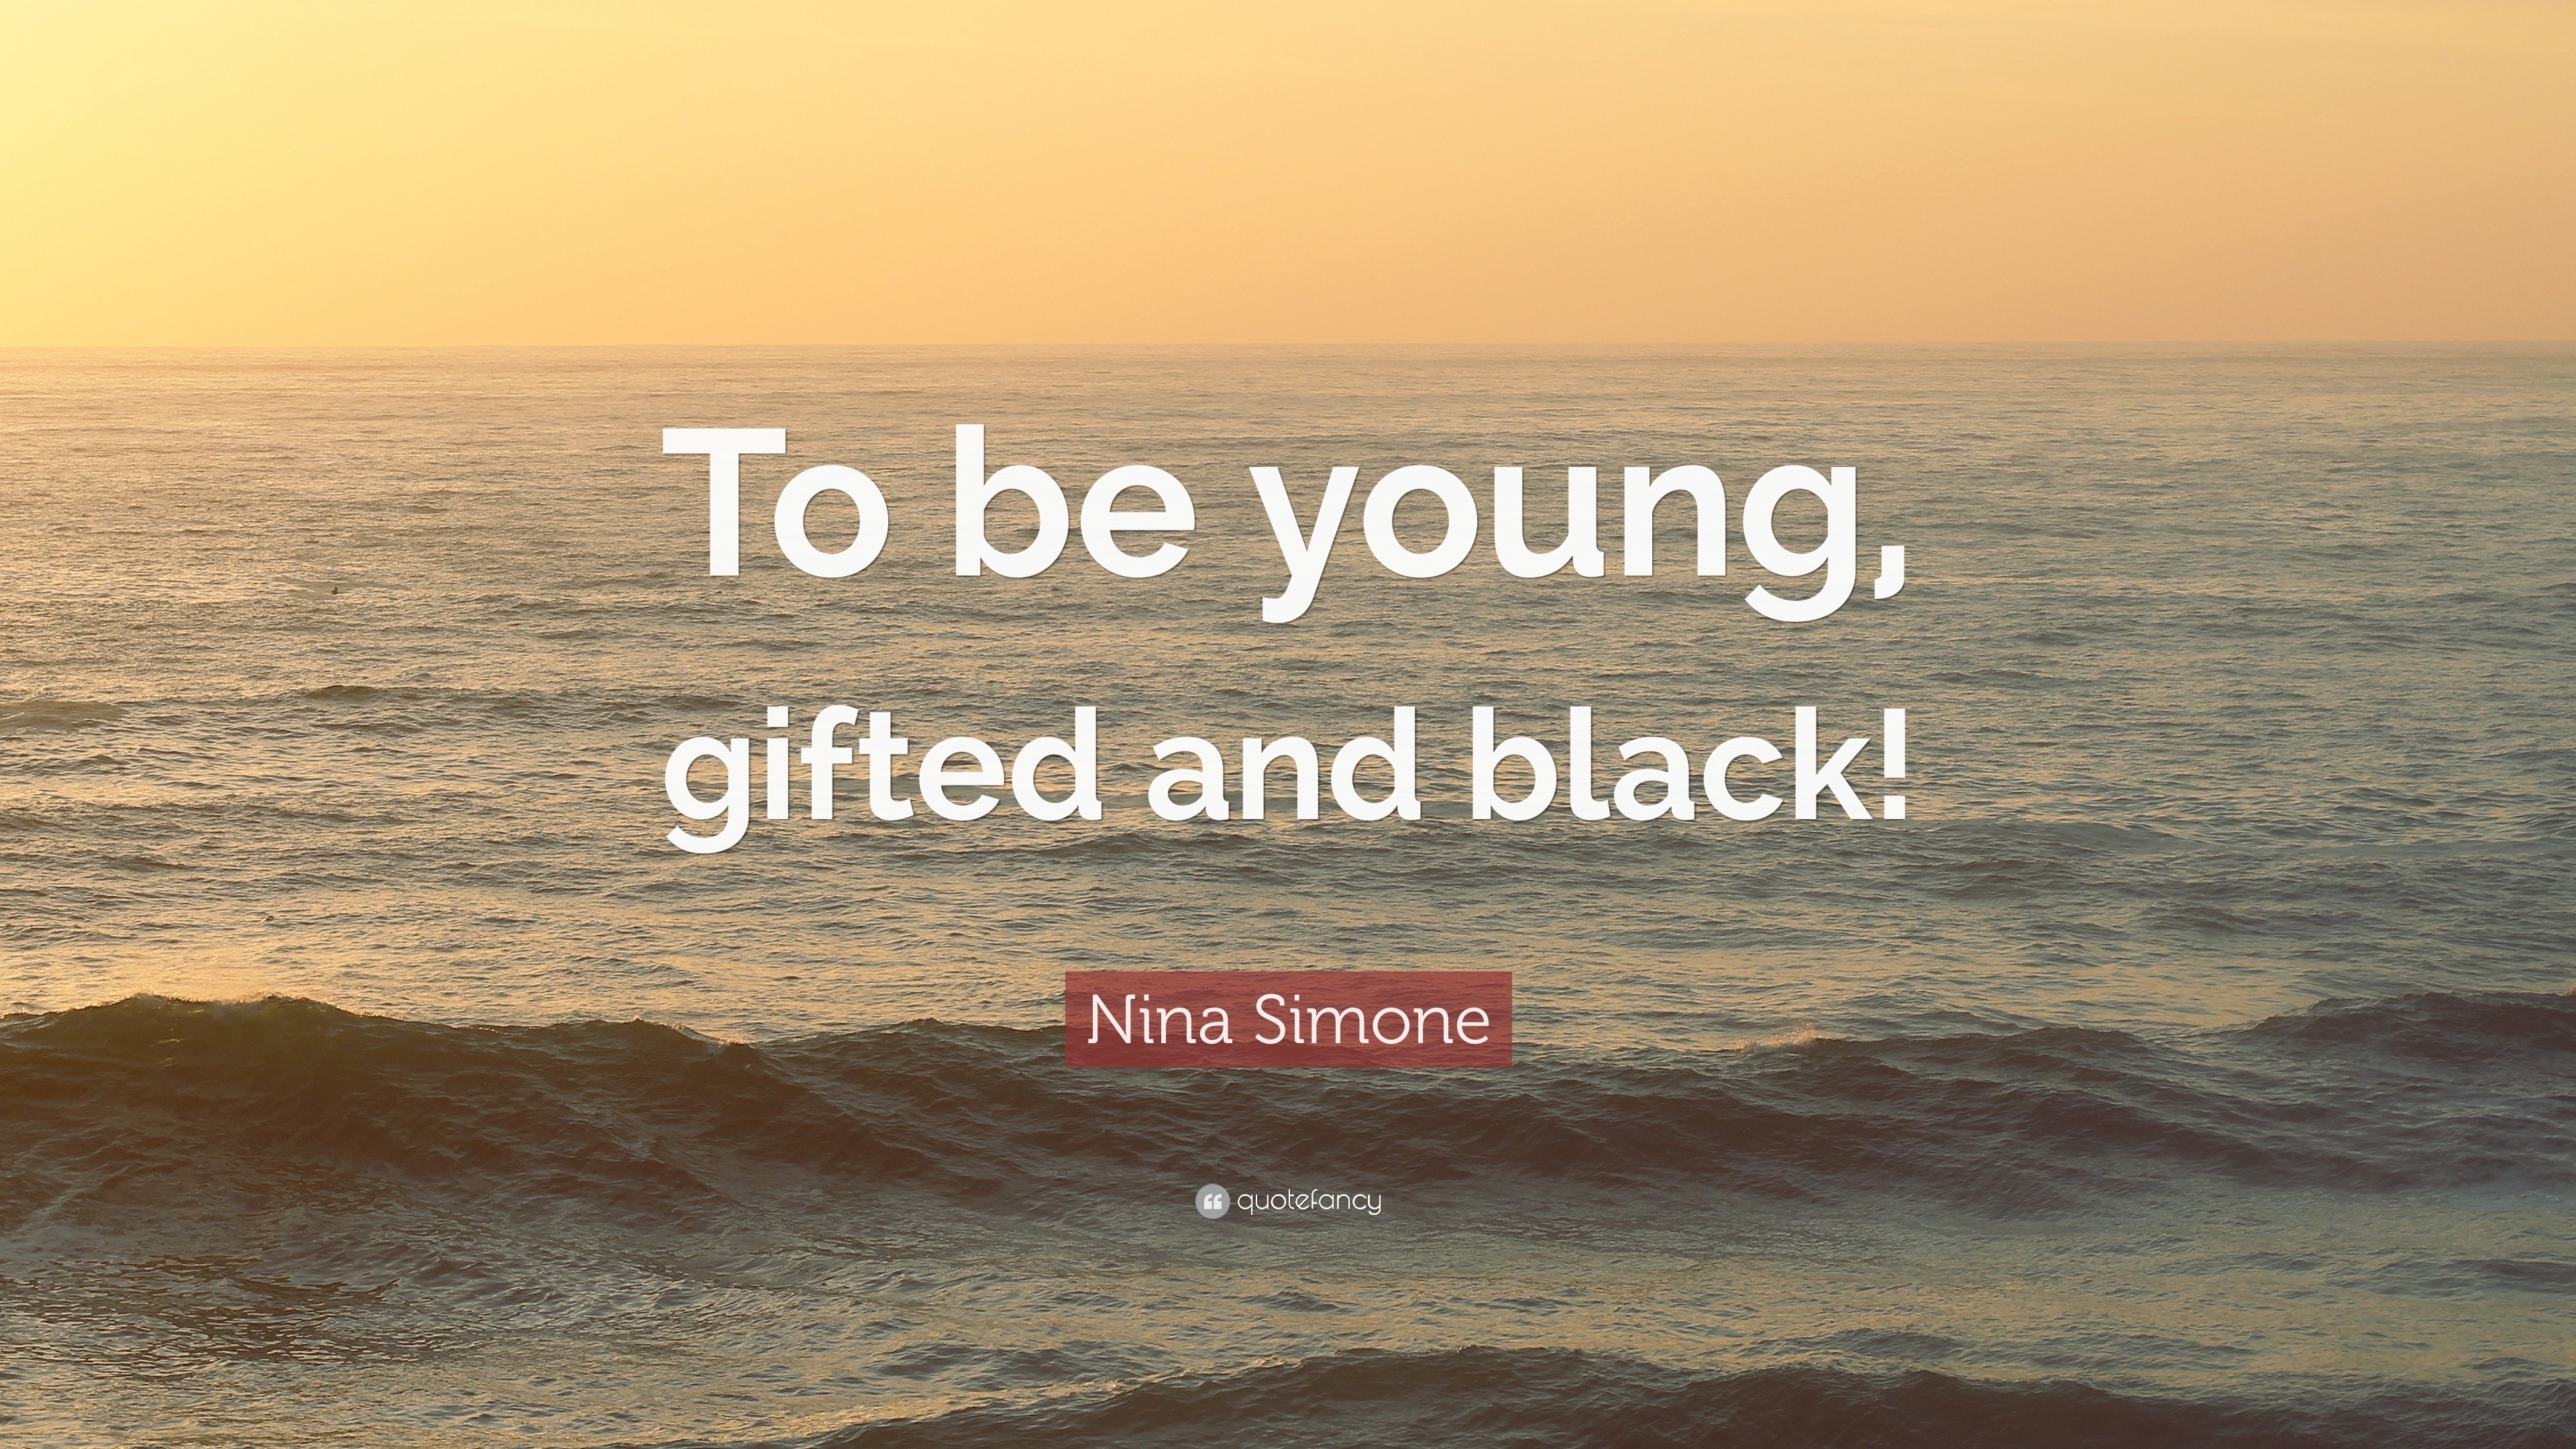 1809781 Nina Simone Quote To Be Young Gifted And Black 